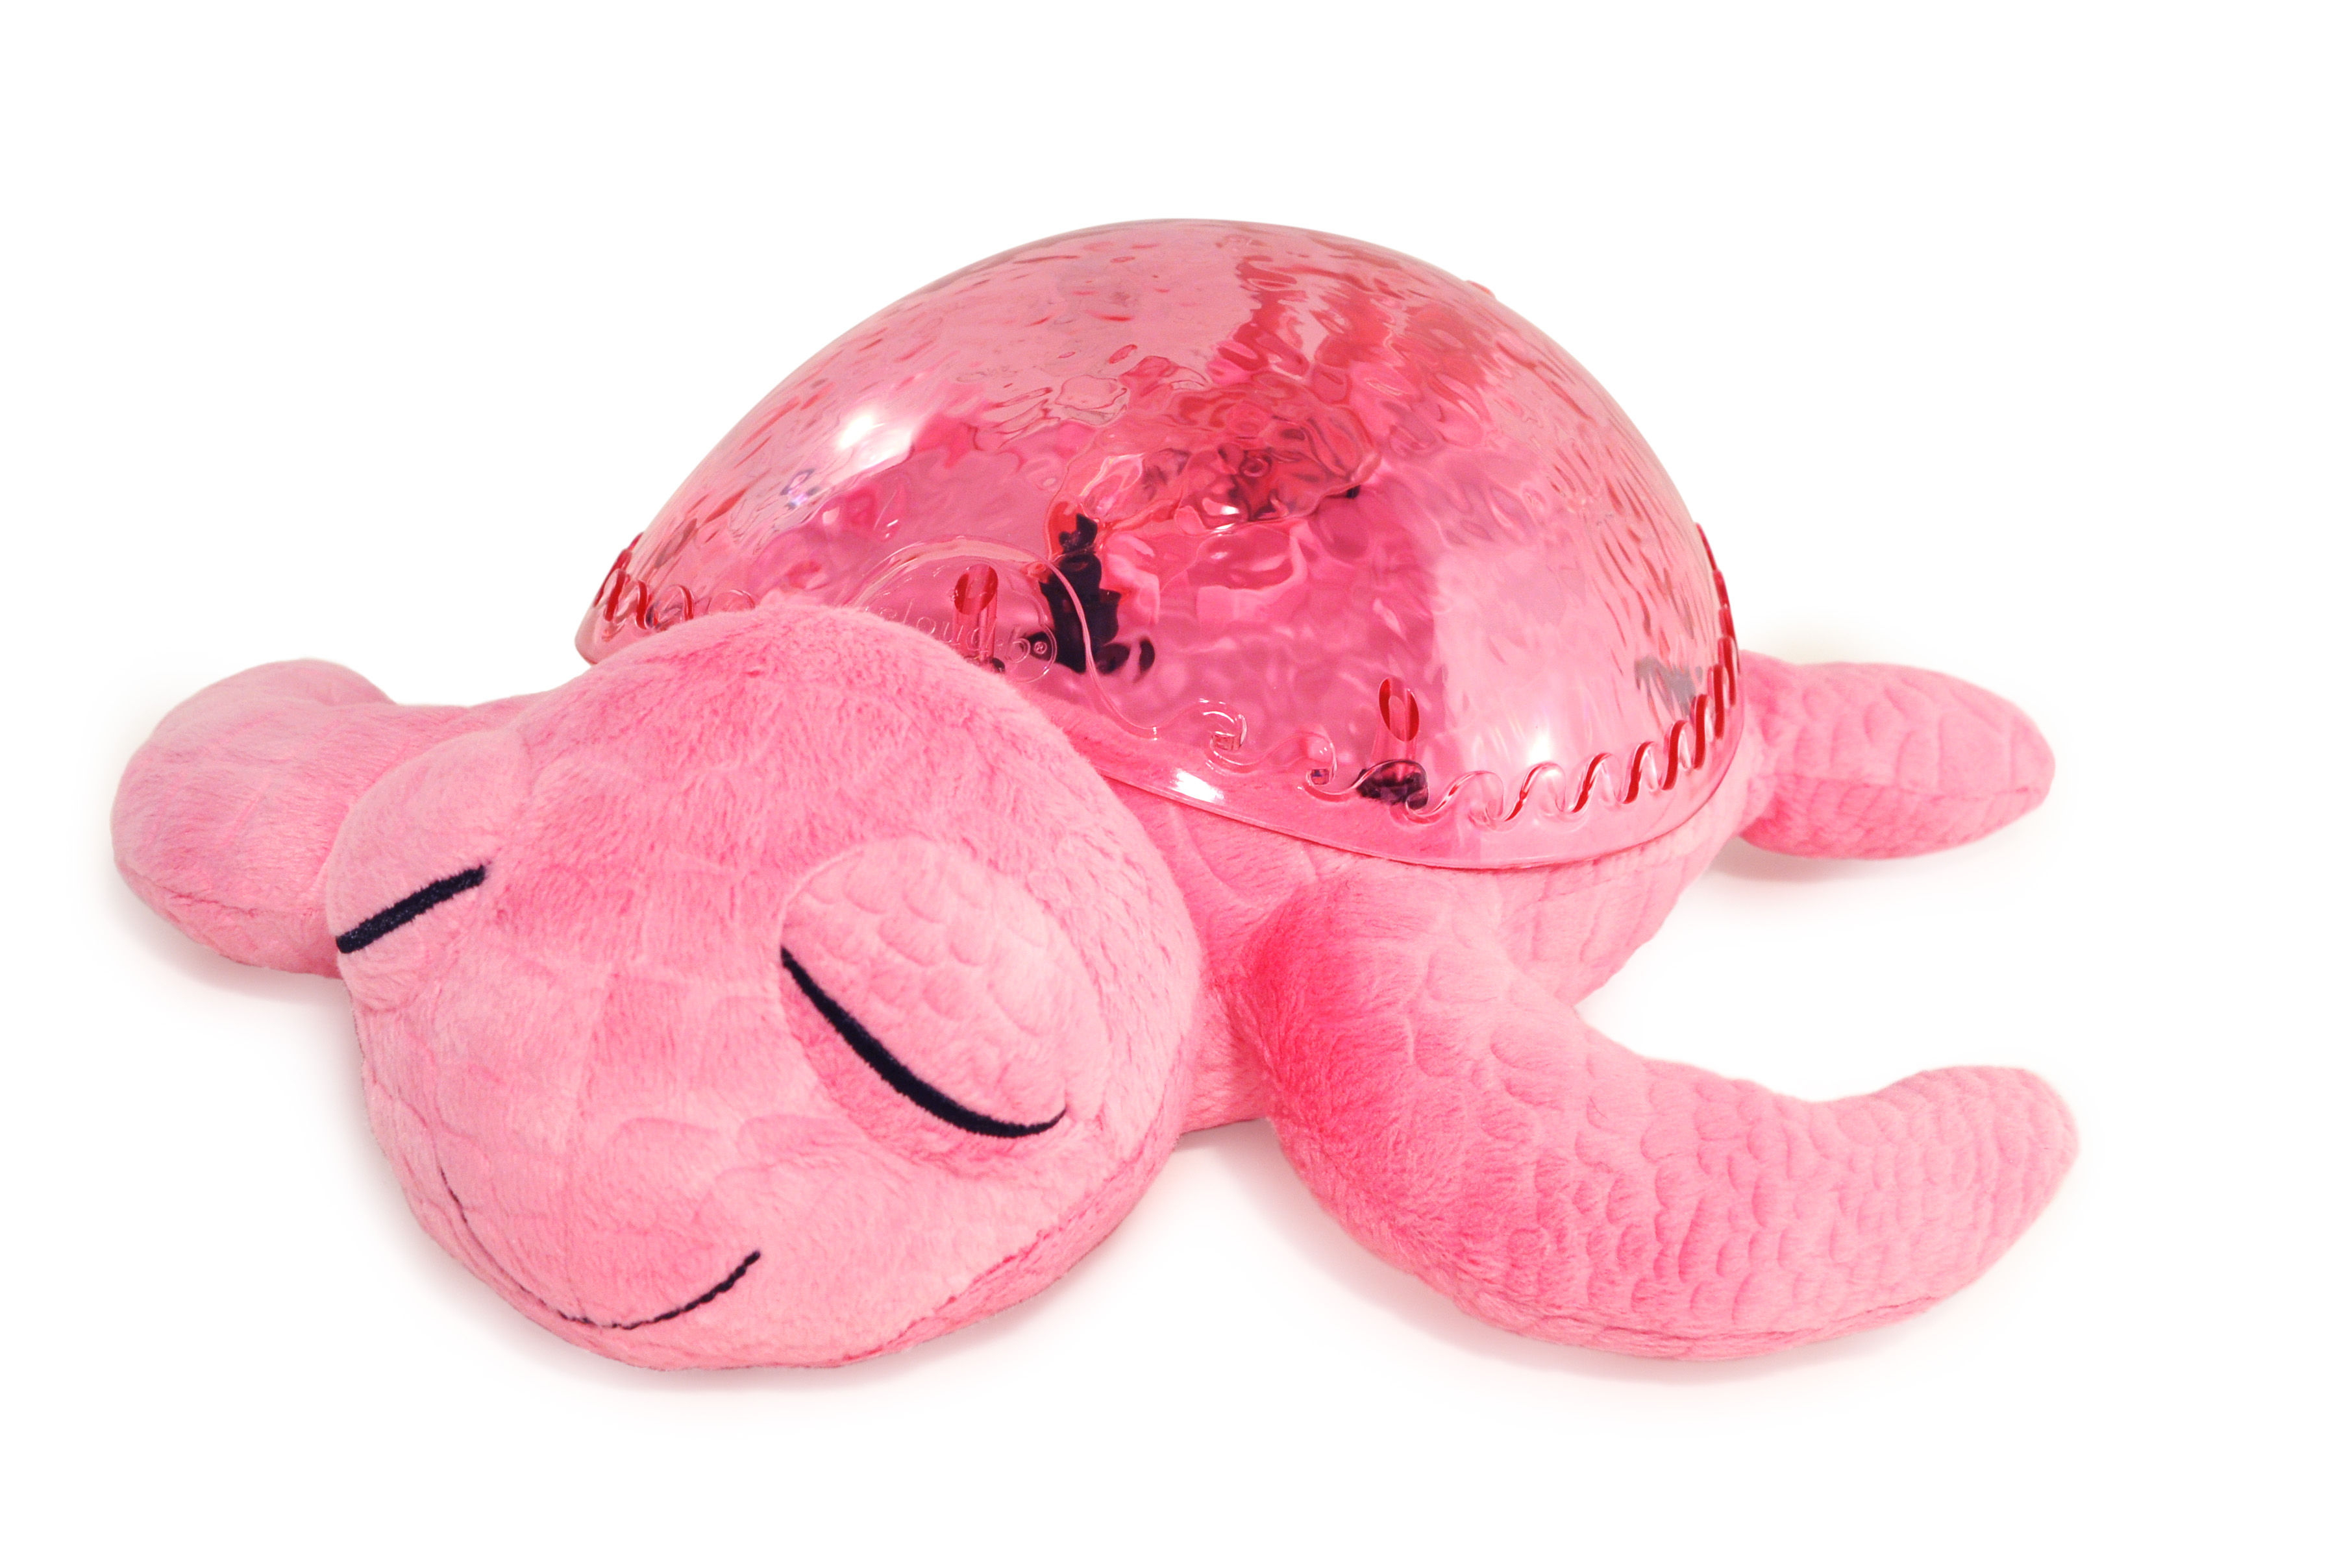 Tranquil Turtle magic LED night light - pink - by cloud b